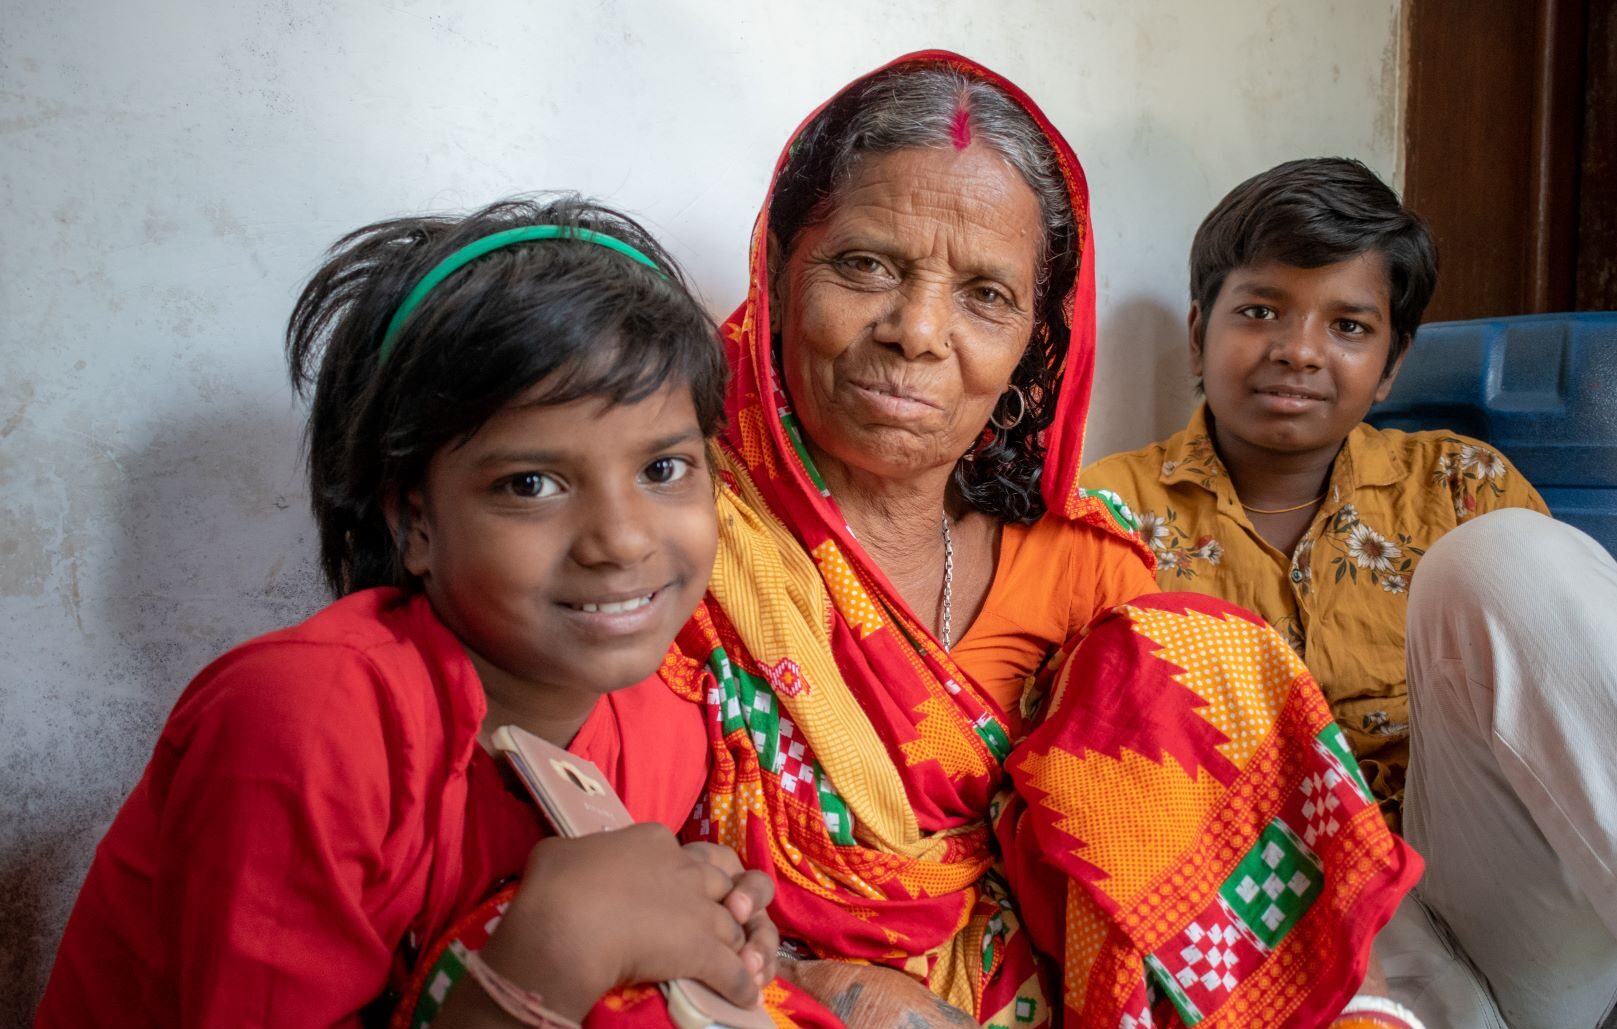 Grandmother with 2 children in India